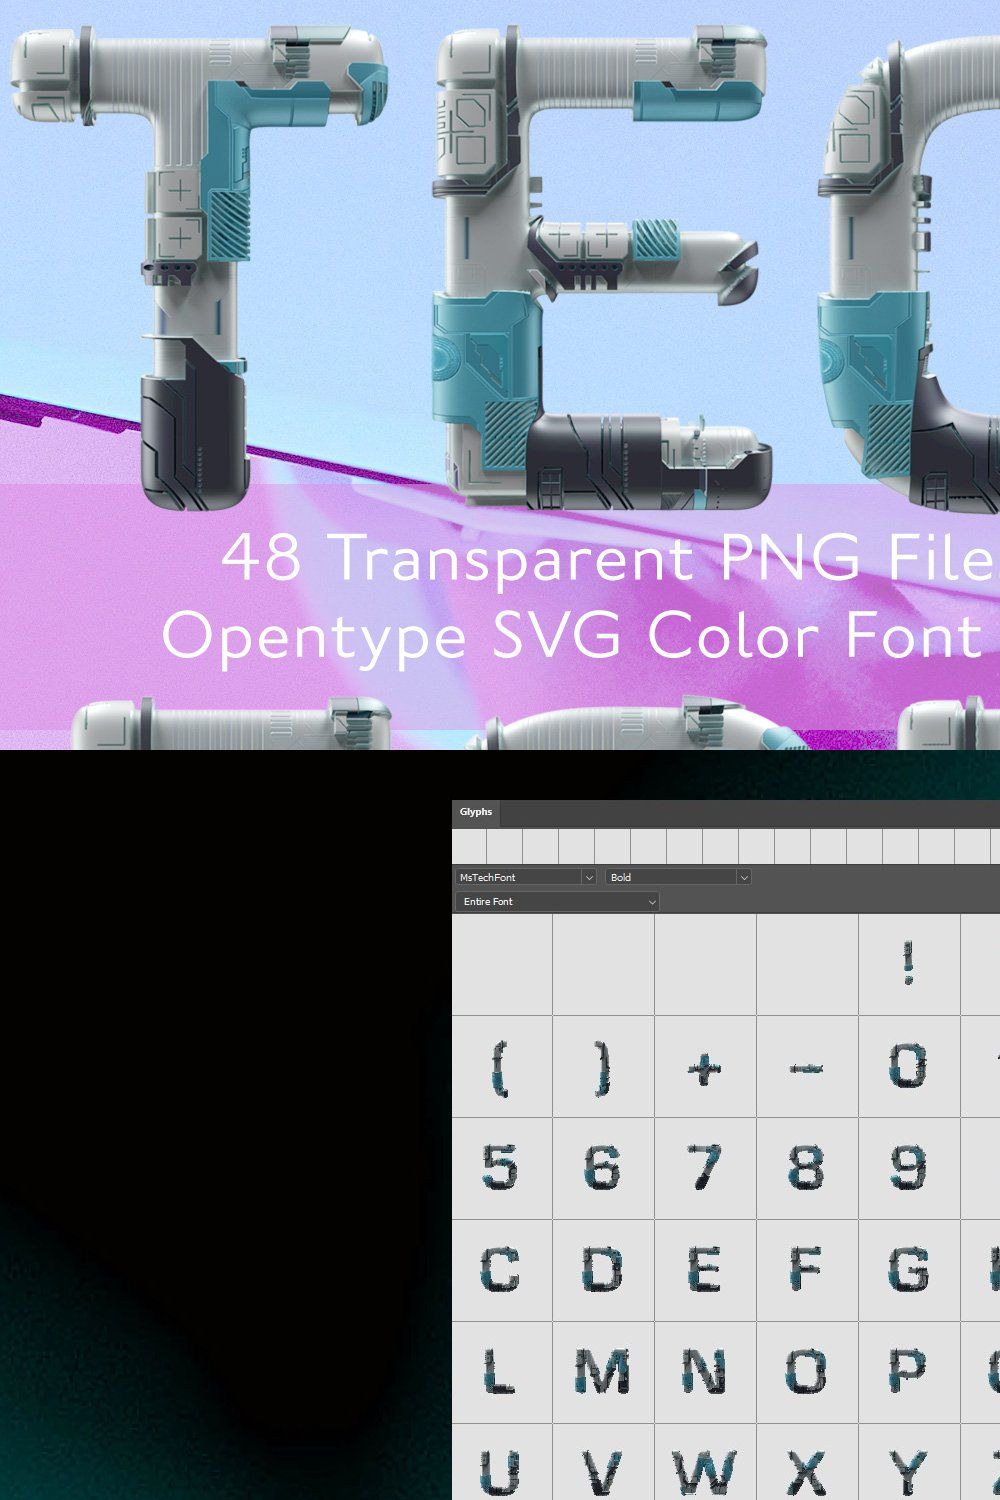 MS Tech Opentype Color Font and PNGs pinterest preview image.